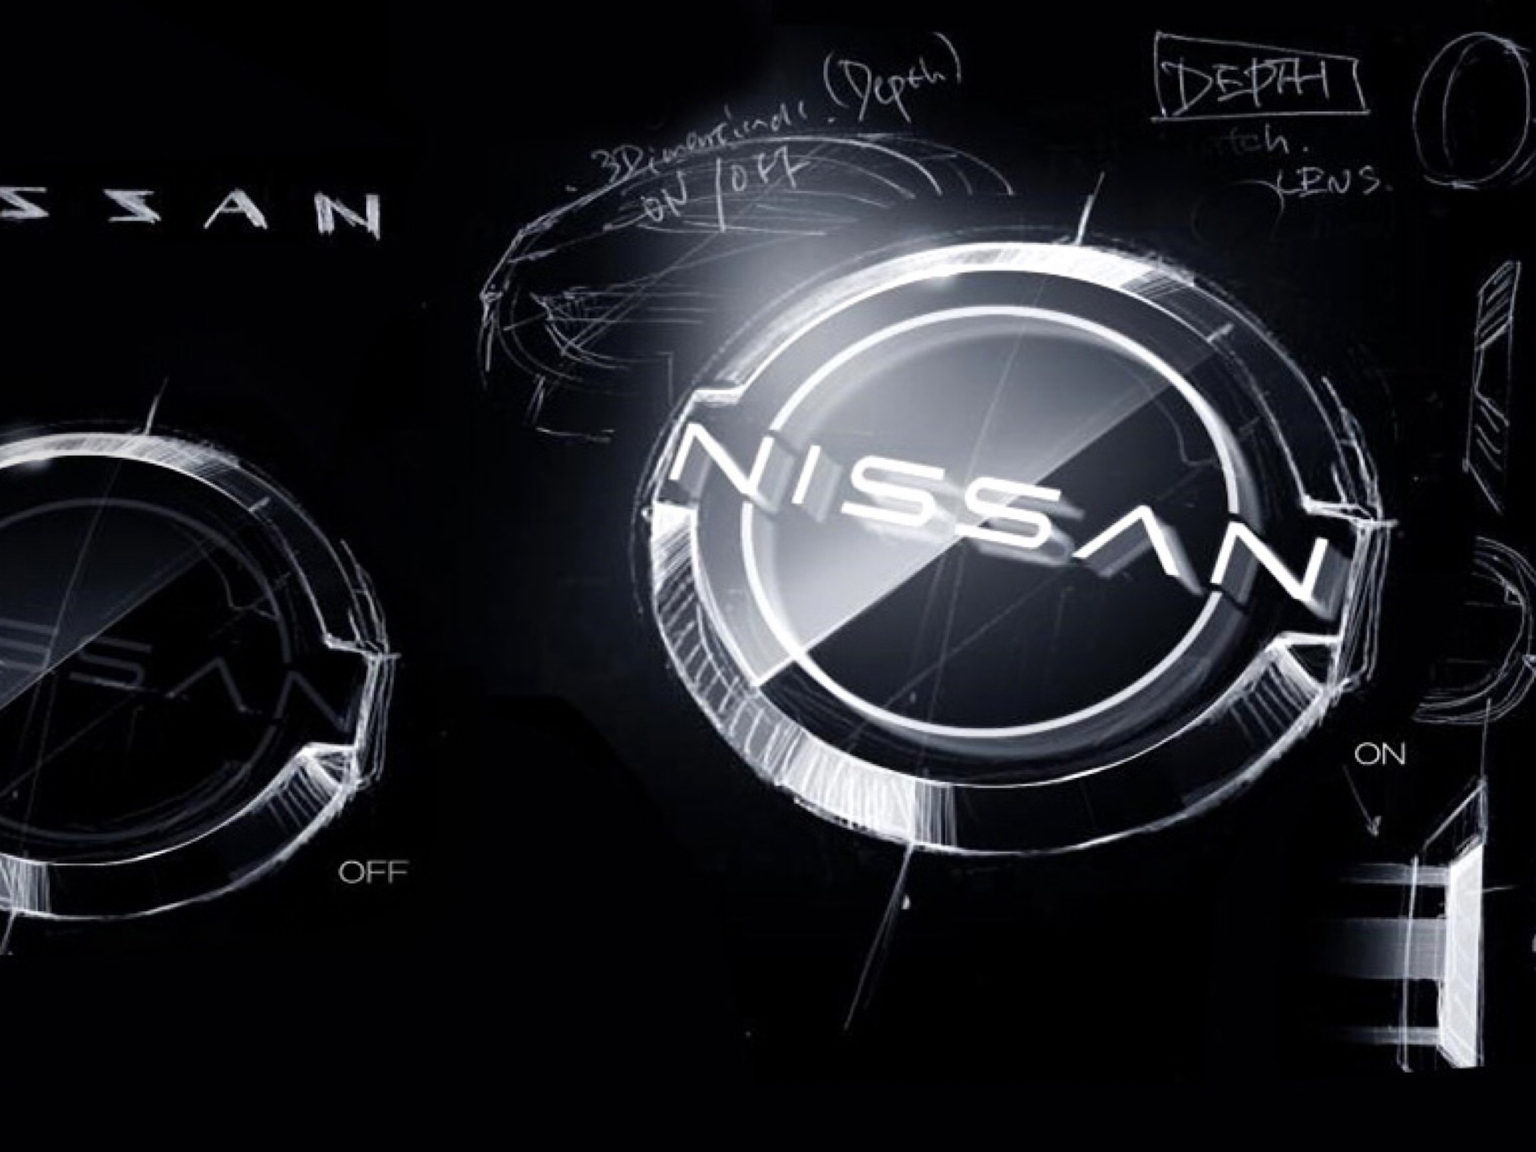 Nissan’s design team spent years crafting the new logo